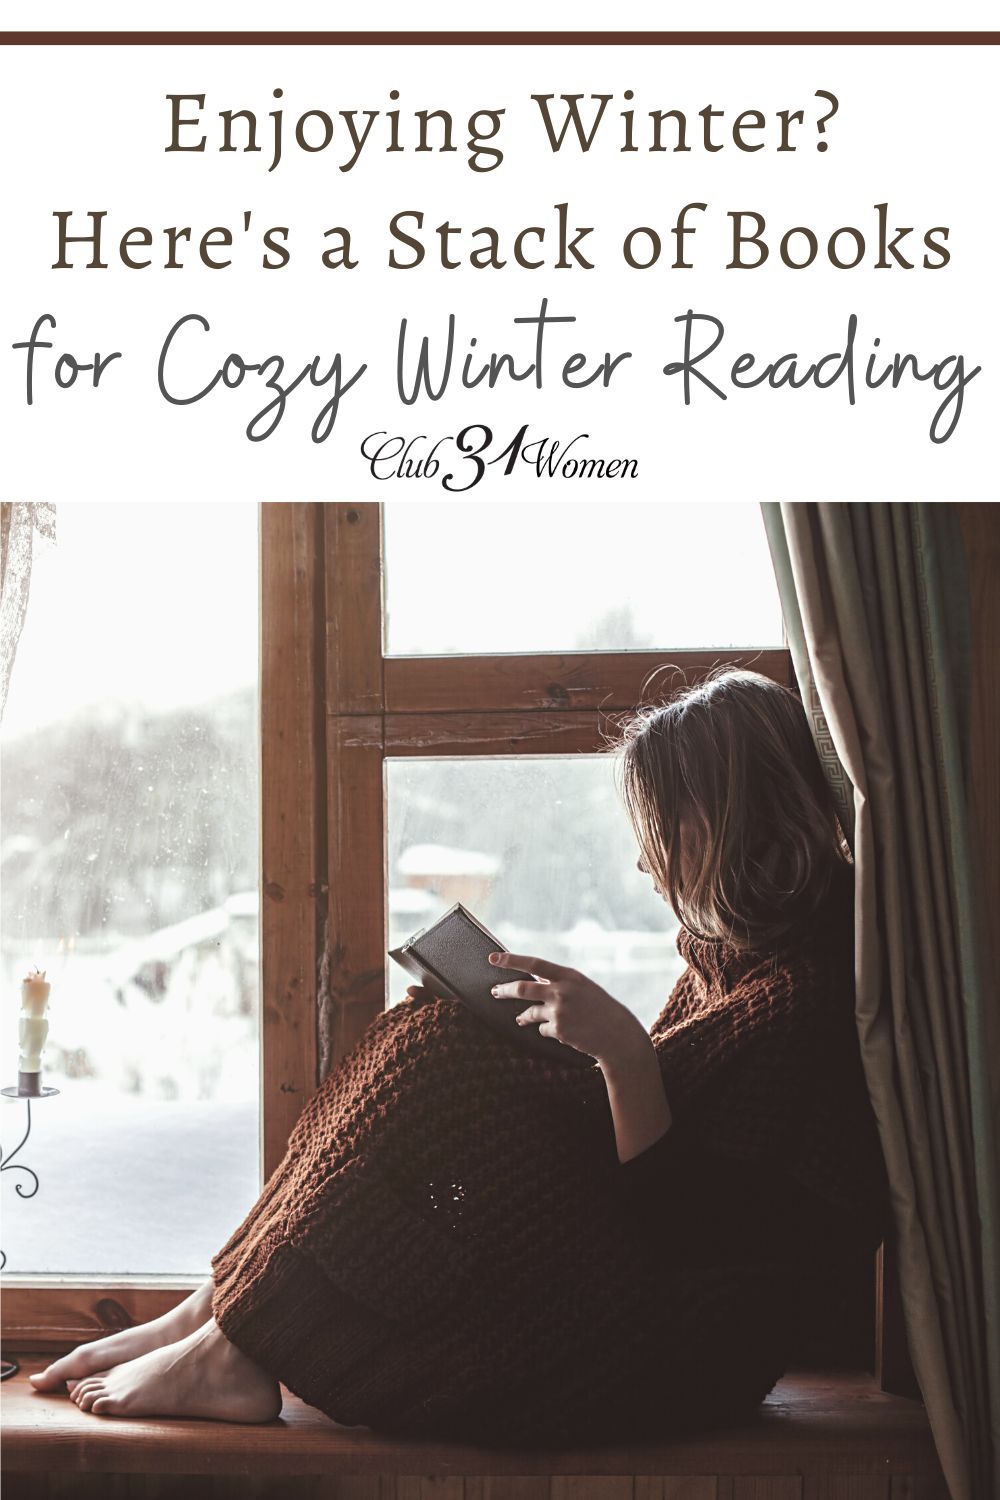 A snowy view is the perfect ambiance when curled up with a good book. If you're looking for a great stack of cozy winter reading, stock up on these titles! via @Club31Women